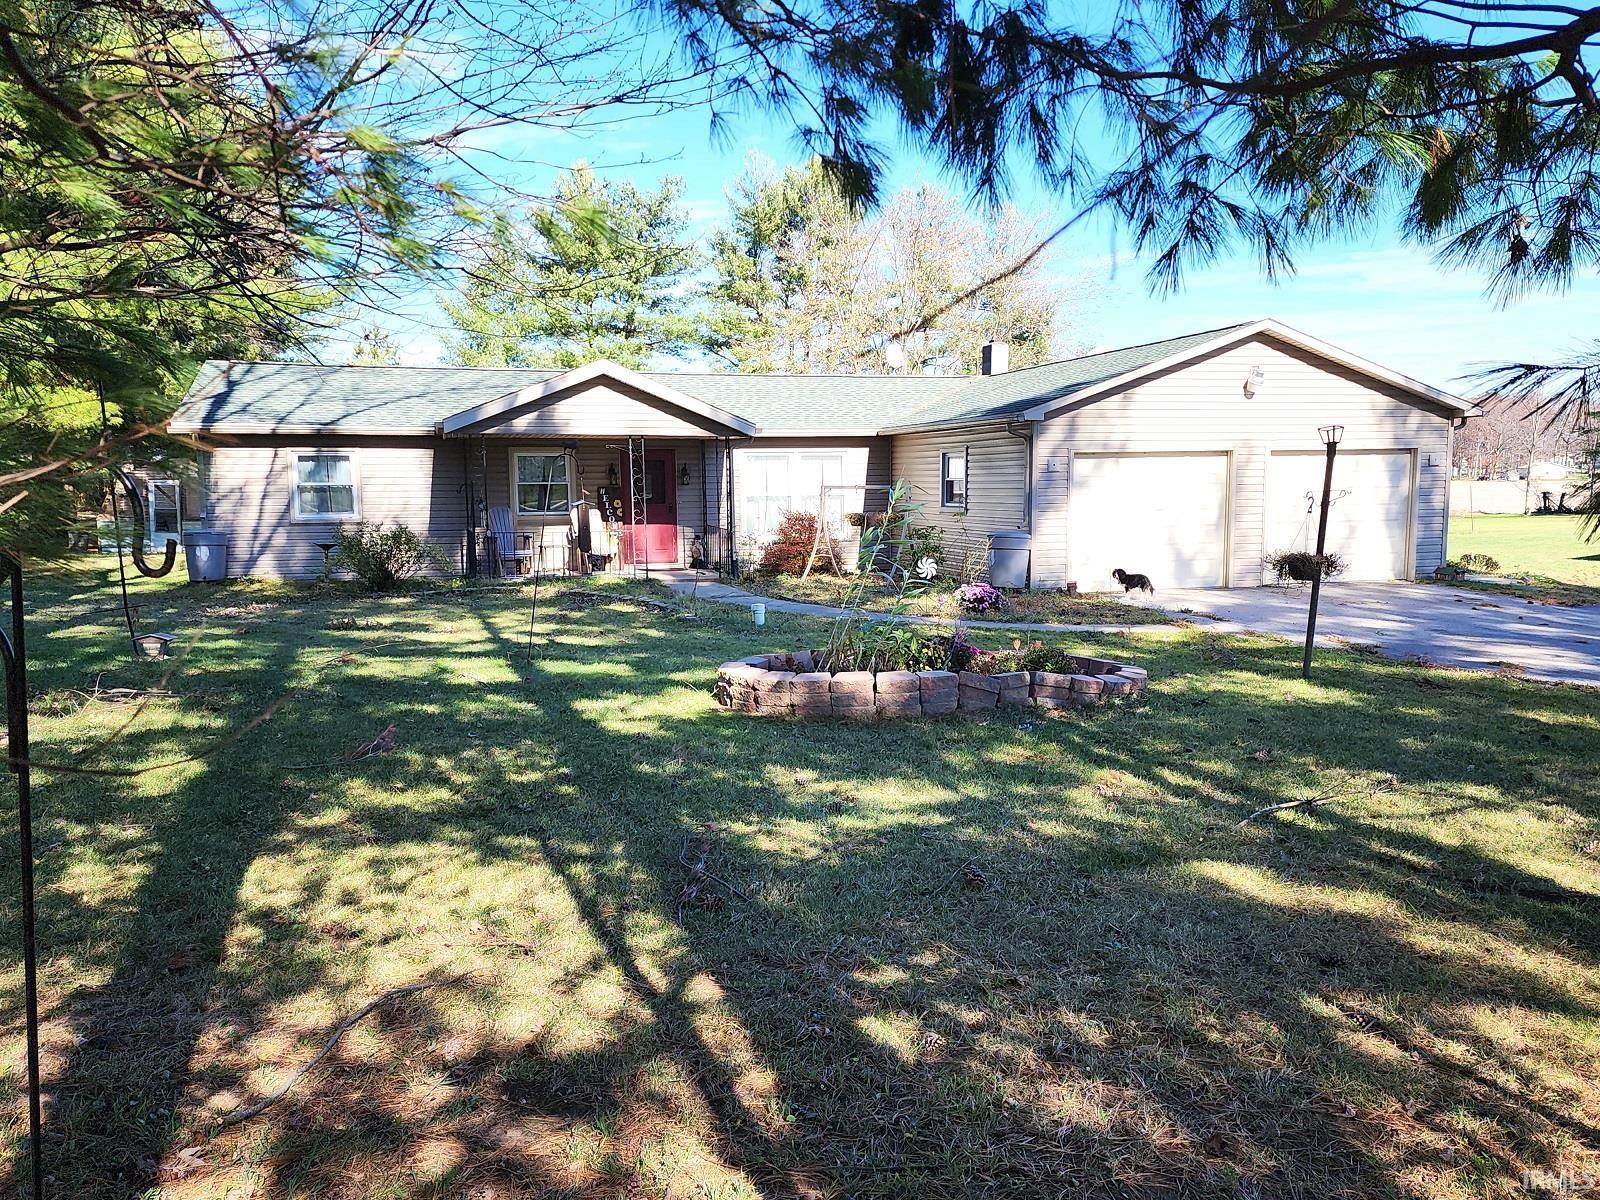 In 2017 this home, just between Fort Wayne and Columbia City, received new windows, new siding, and a new roof! All of the big ticket items are new and with some imagination, this charming ranch can be your perfect home. This home in the country boasts 3 beds, 1.5 baths, a 3 seasons room, and multiple outbuildings perfect for a hobbyist or toy storage. There's also a greenhouse for those who like to grow their own plants and vegetables all year long.  *Cash or Conventional only*